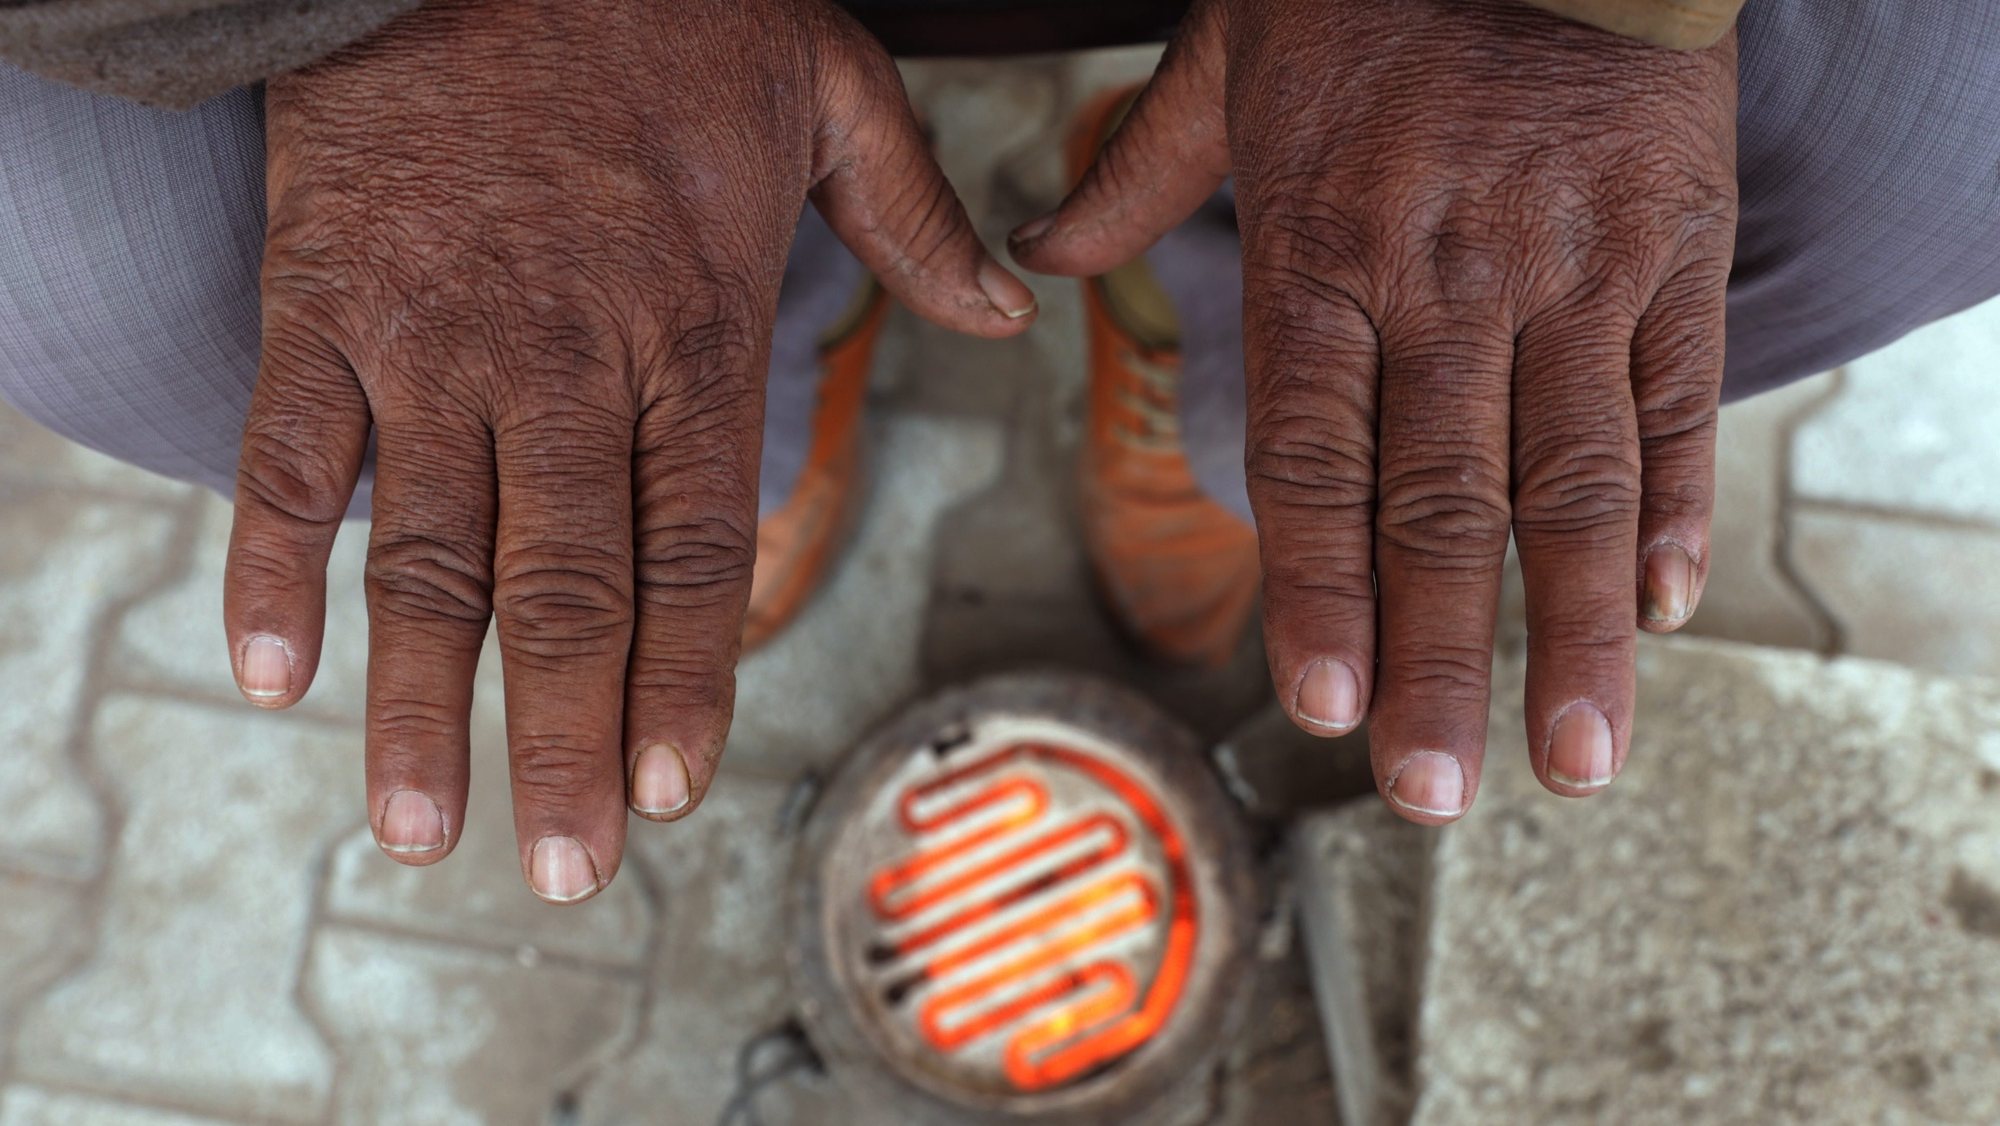 epa05661807 An Indian man warms his hands up over an electric heater on a cold and foggy morning in Amritsar, India, 06 December 2016. The region witnessed dense morning fog as winter season approaches its peak.  EPA/RAMINDER PAL SINGH